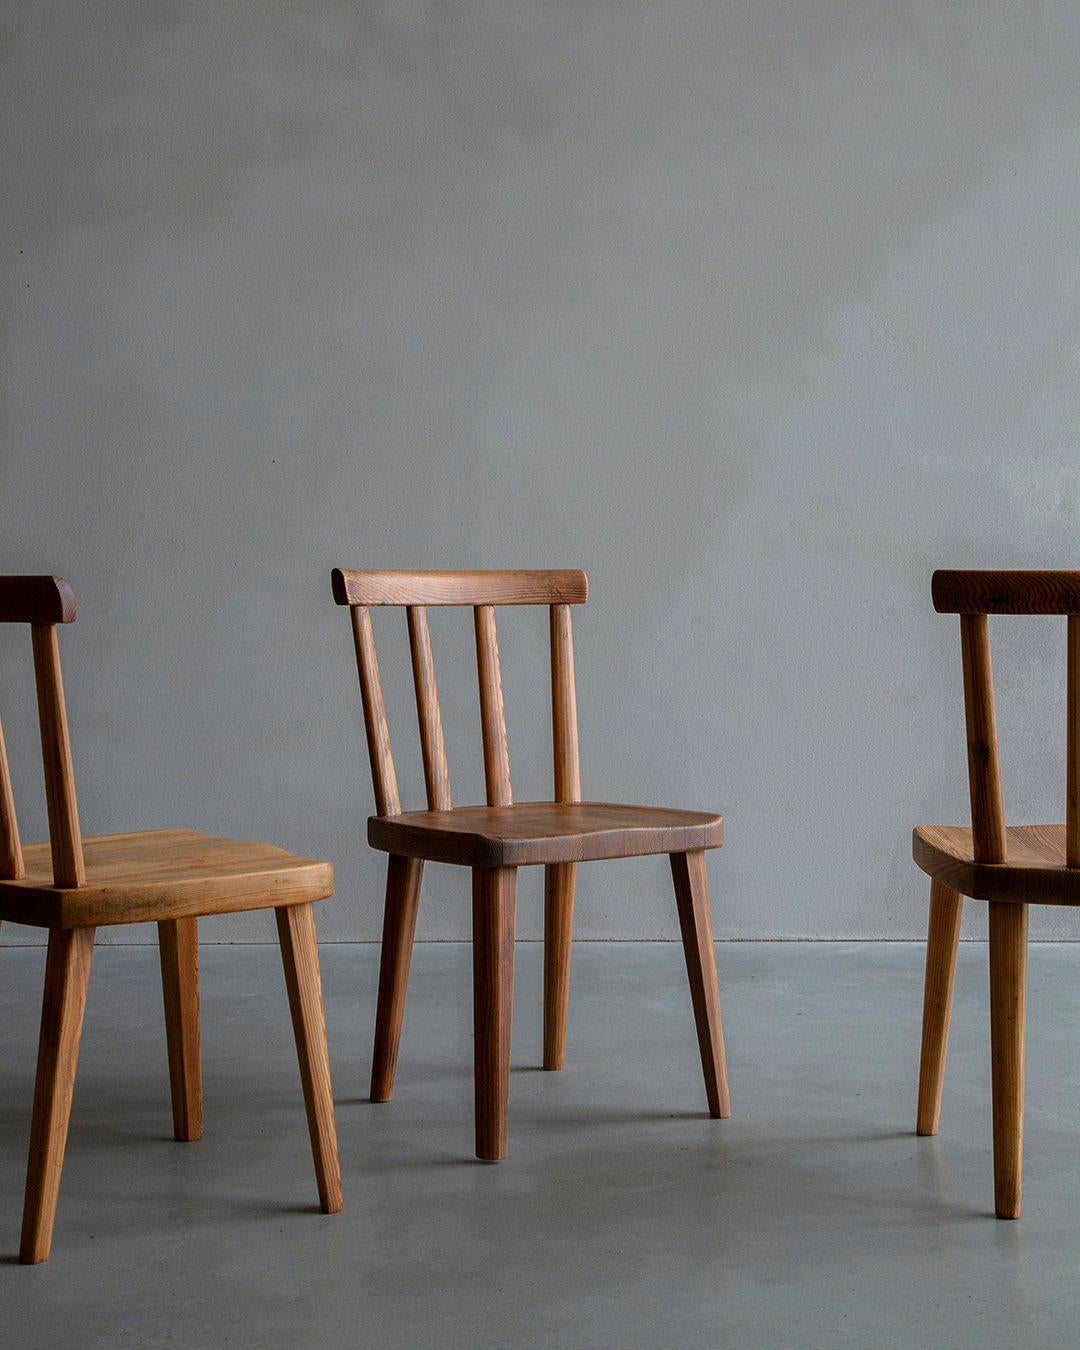 Axel Einar Hjorth “Utö” Dining Chairs set of 4 available - price per piece. These chairs, part of the Utö expo designed by Hjorth and produced by Nordiska Kompaniet in Sweden. These mid-century Scandinavian chairs are in a good vintage condition,